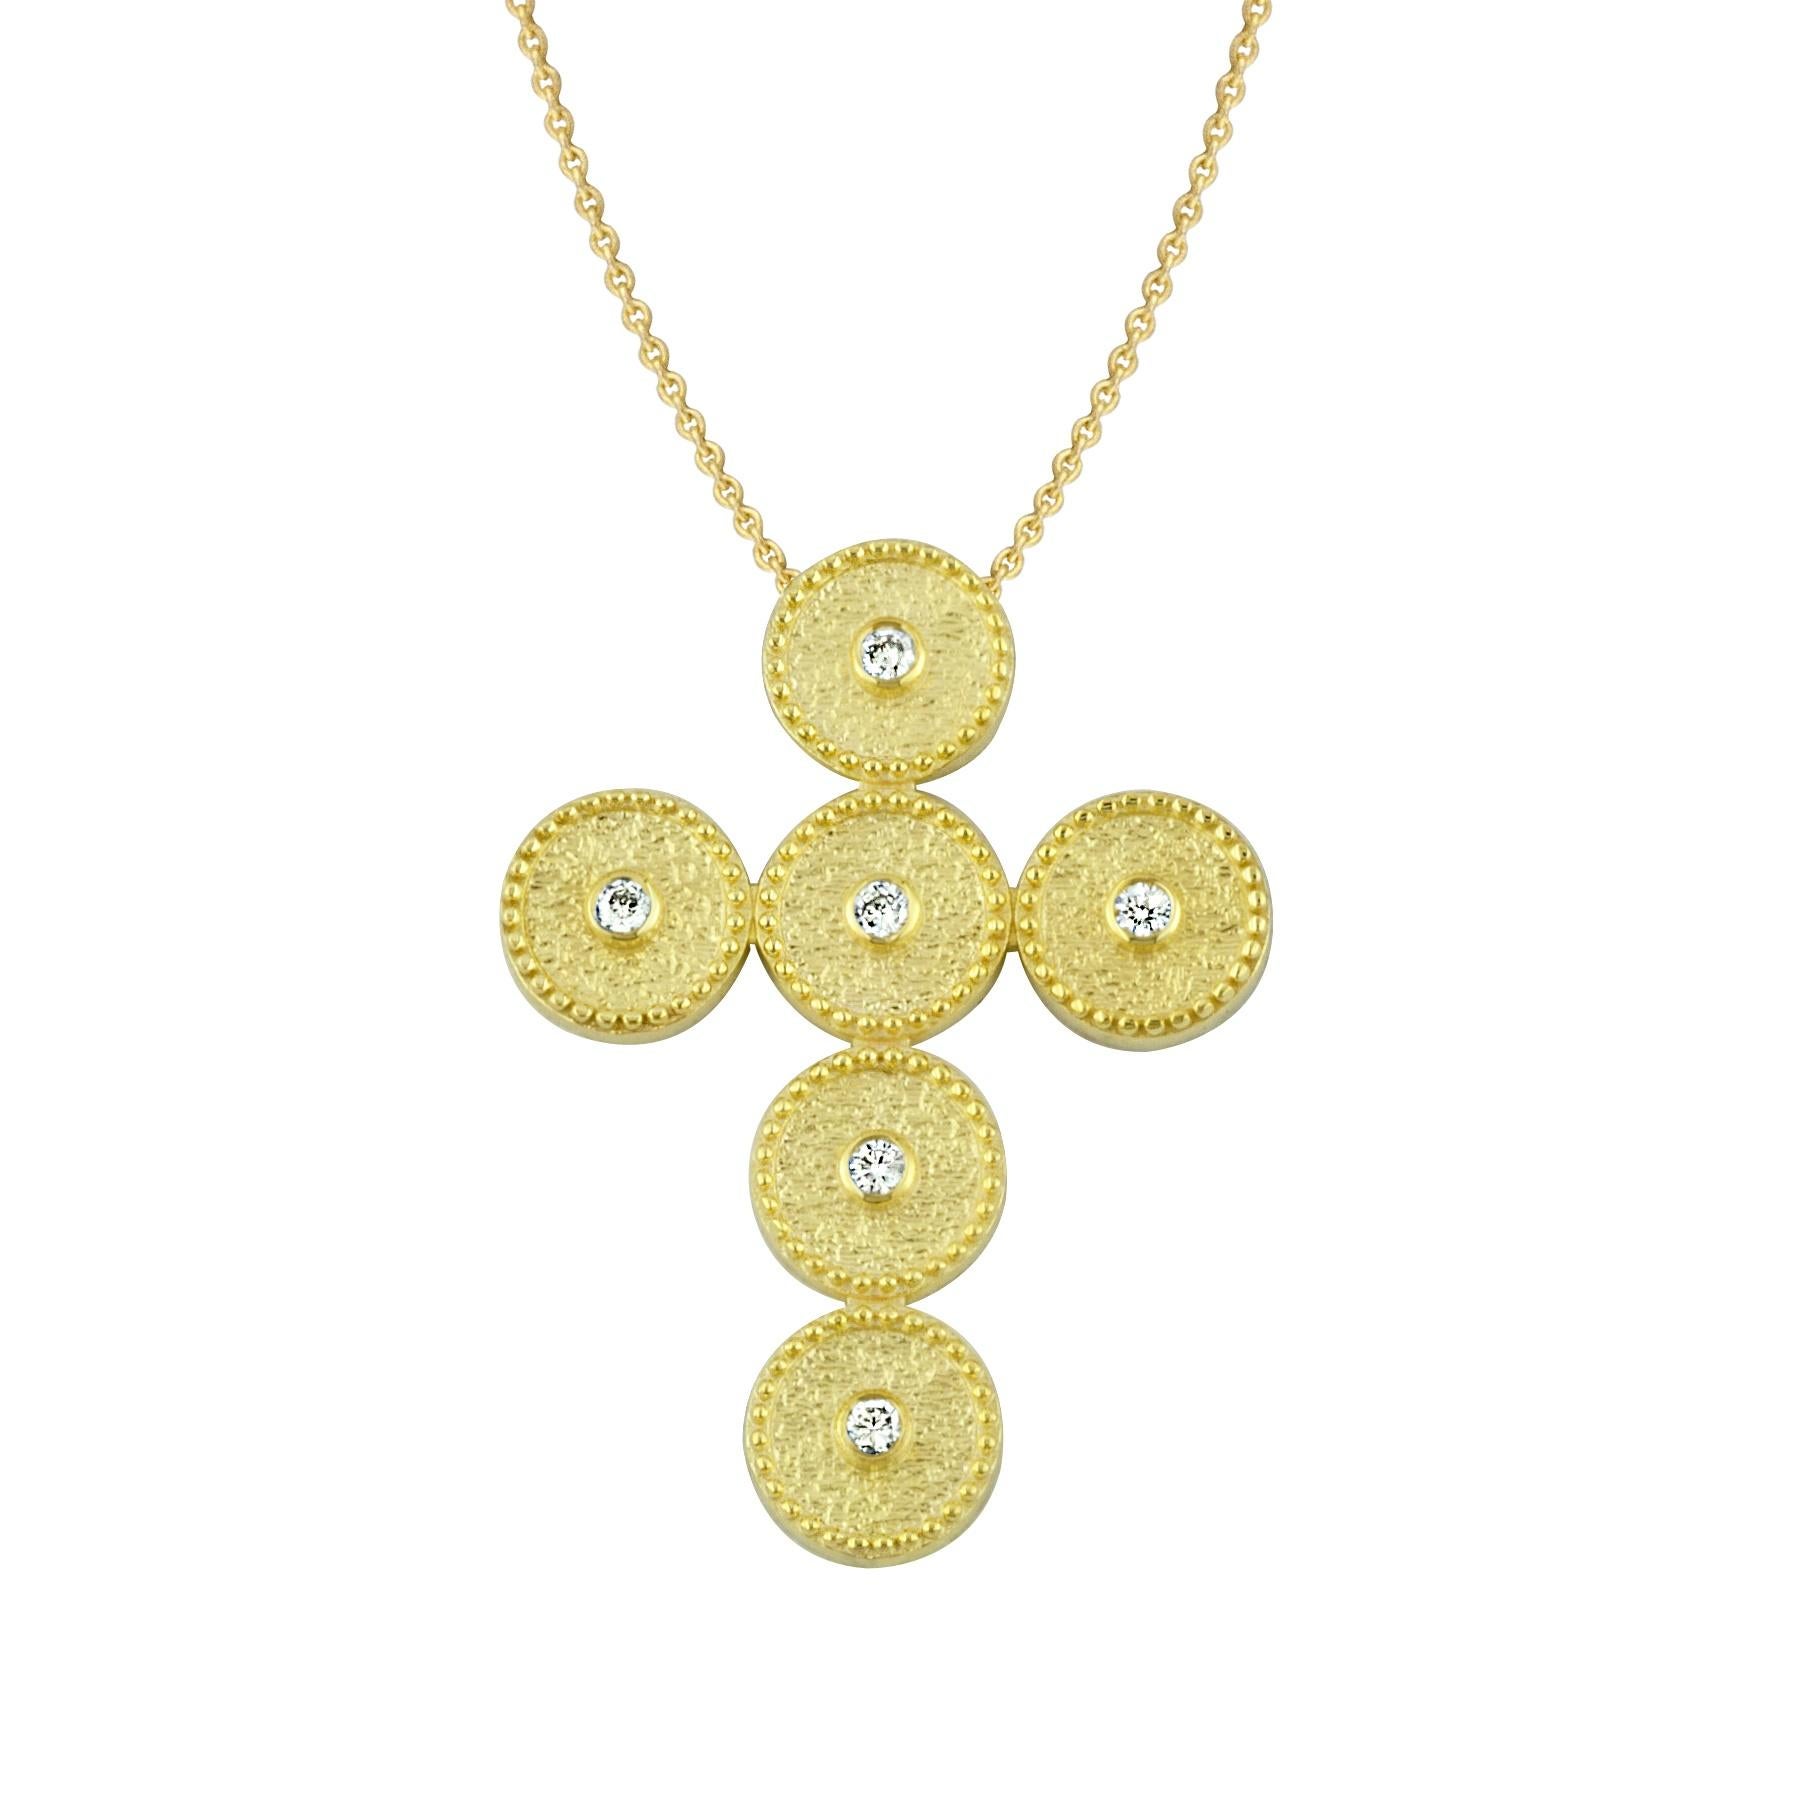 This S.Georgios Cross is all handmade from solid 18 Karat Yellow Gold and is microscopically decorated with granulation work all the way around. The background of the stunning Cross has a unique velvet look and features 6 Brilliant cut Diamonds